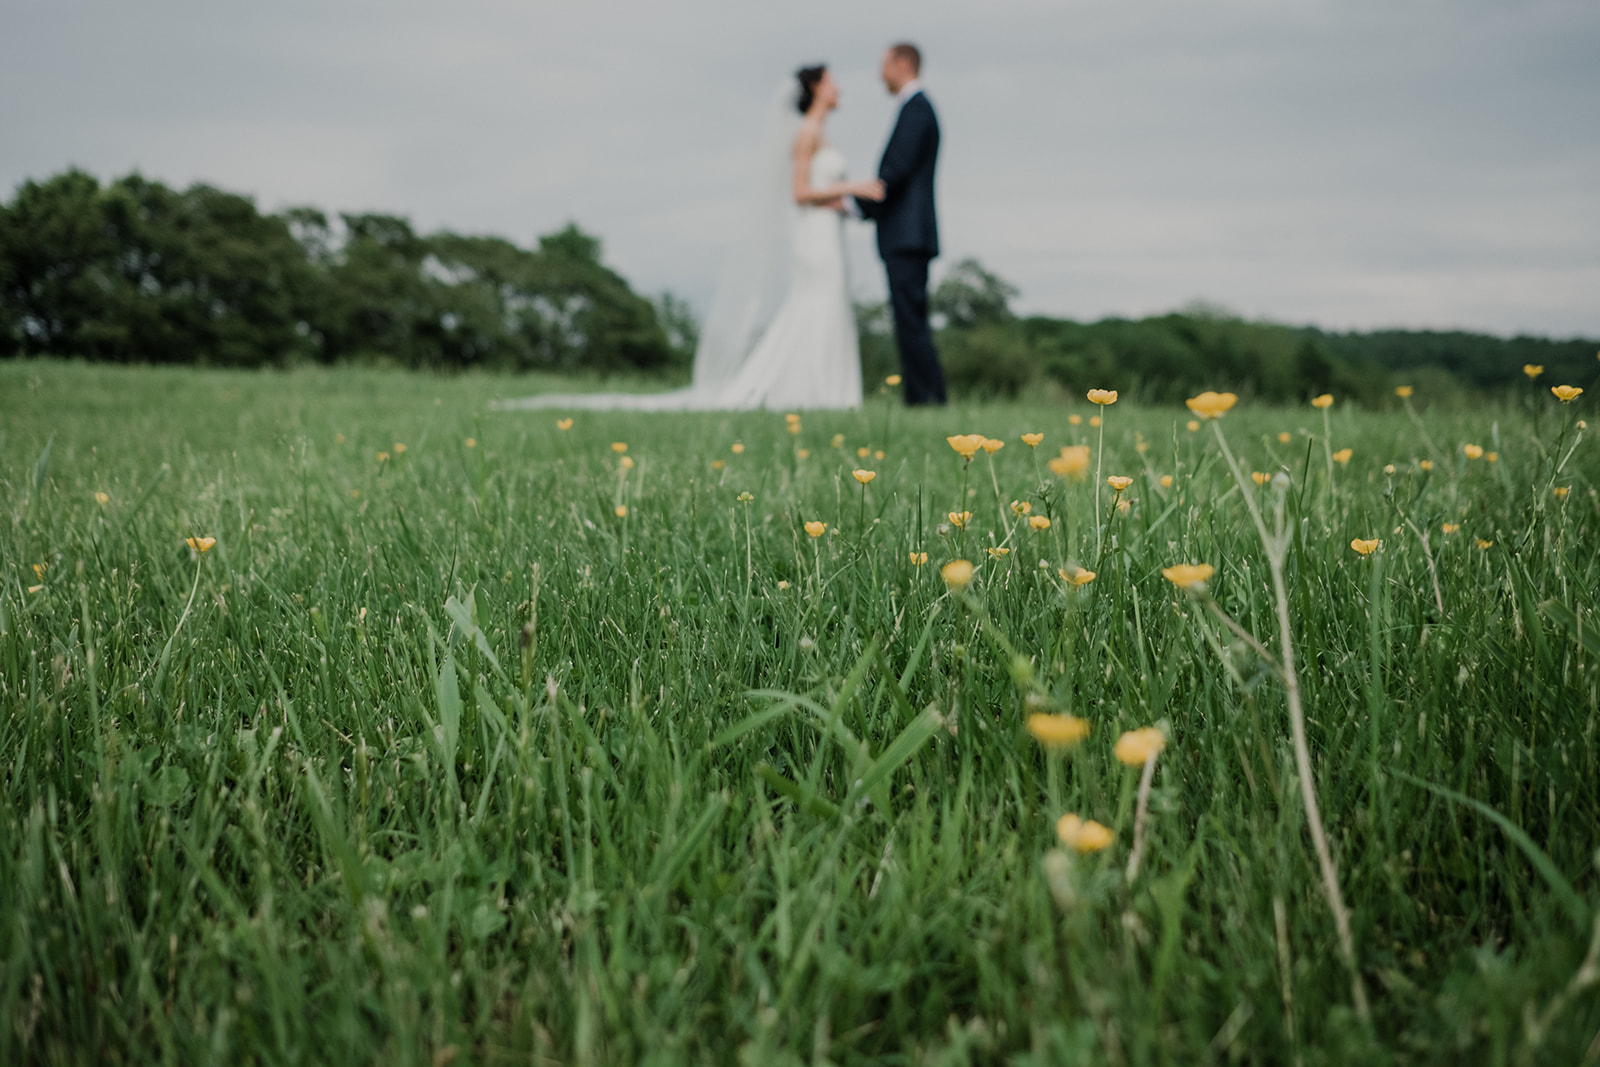 Little yellow buttercup flowers adorn the grassy field that the bride and groom are standing in during their first look before their outdoor wedding ceremony at Blue Hill Farm in Waterford, VA.